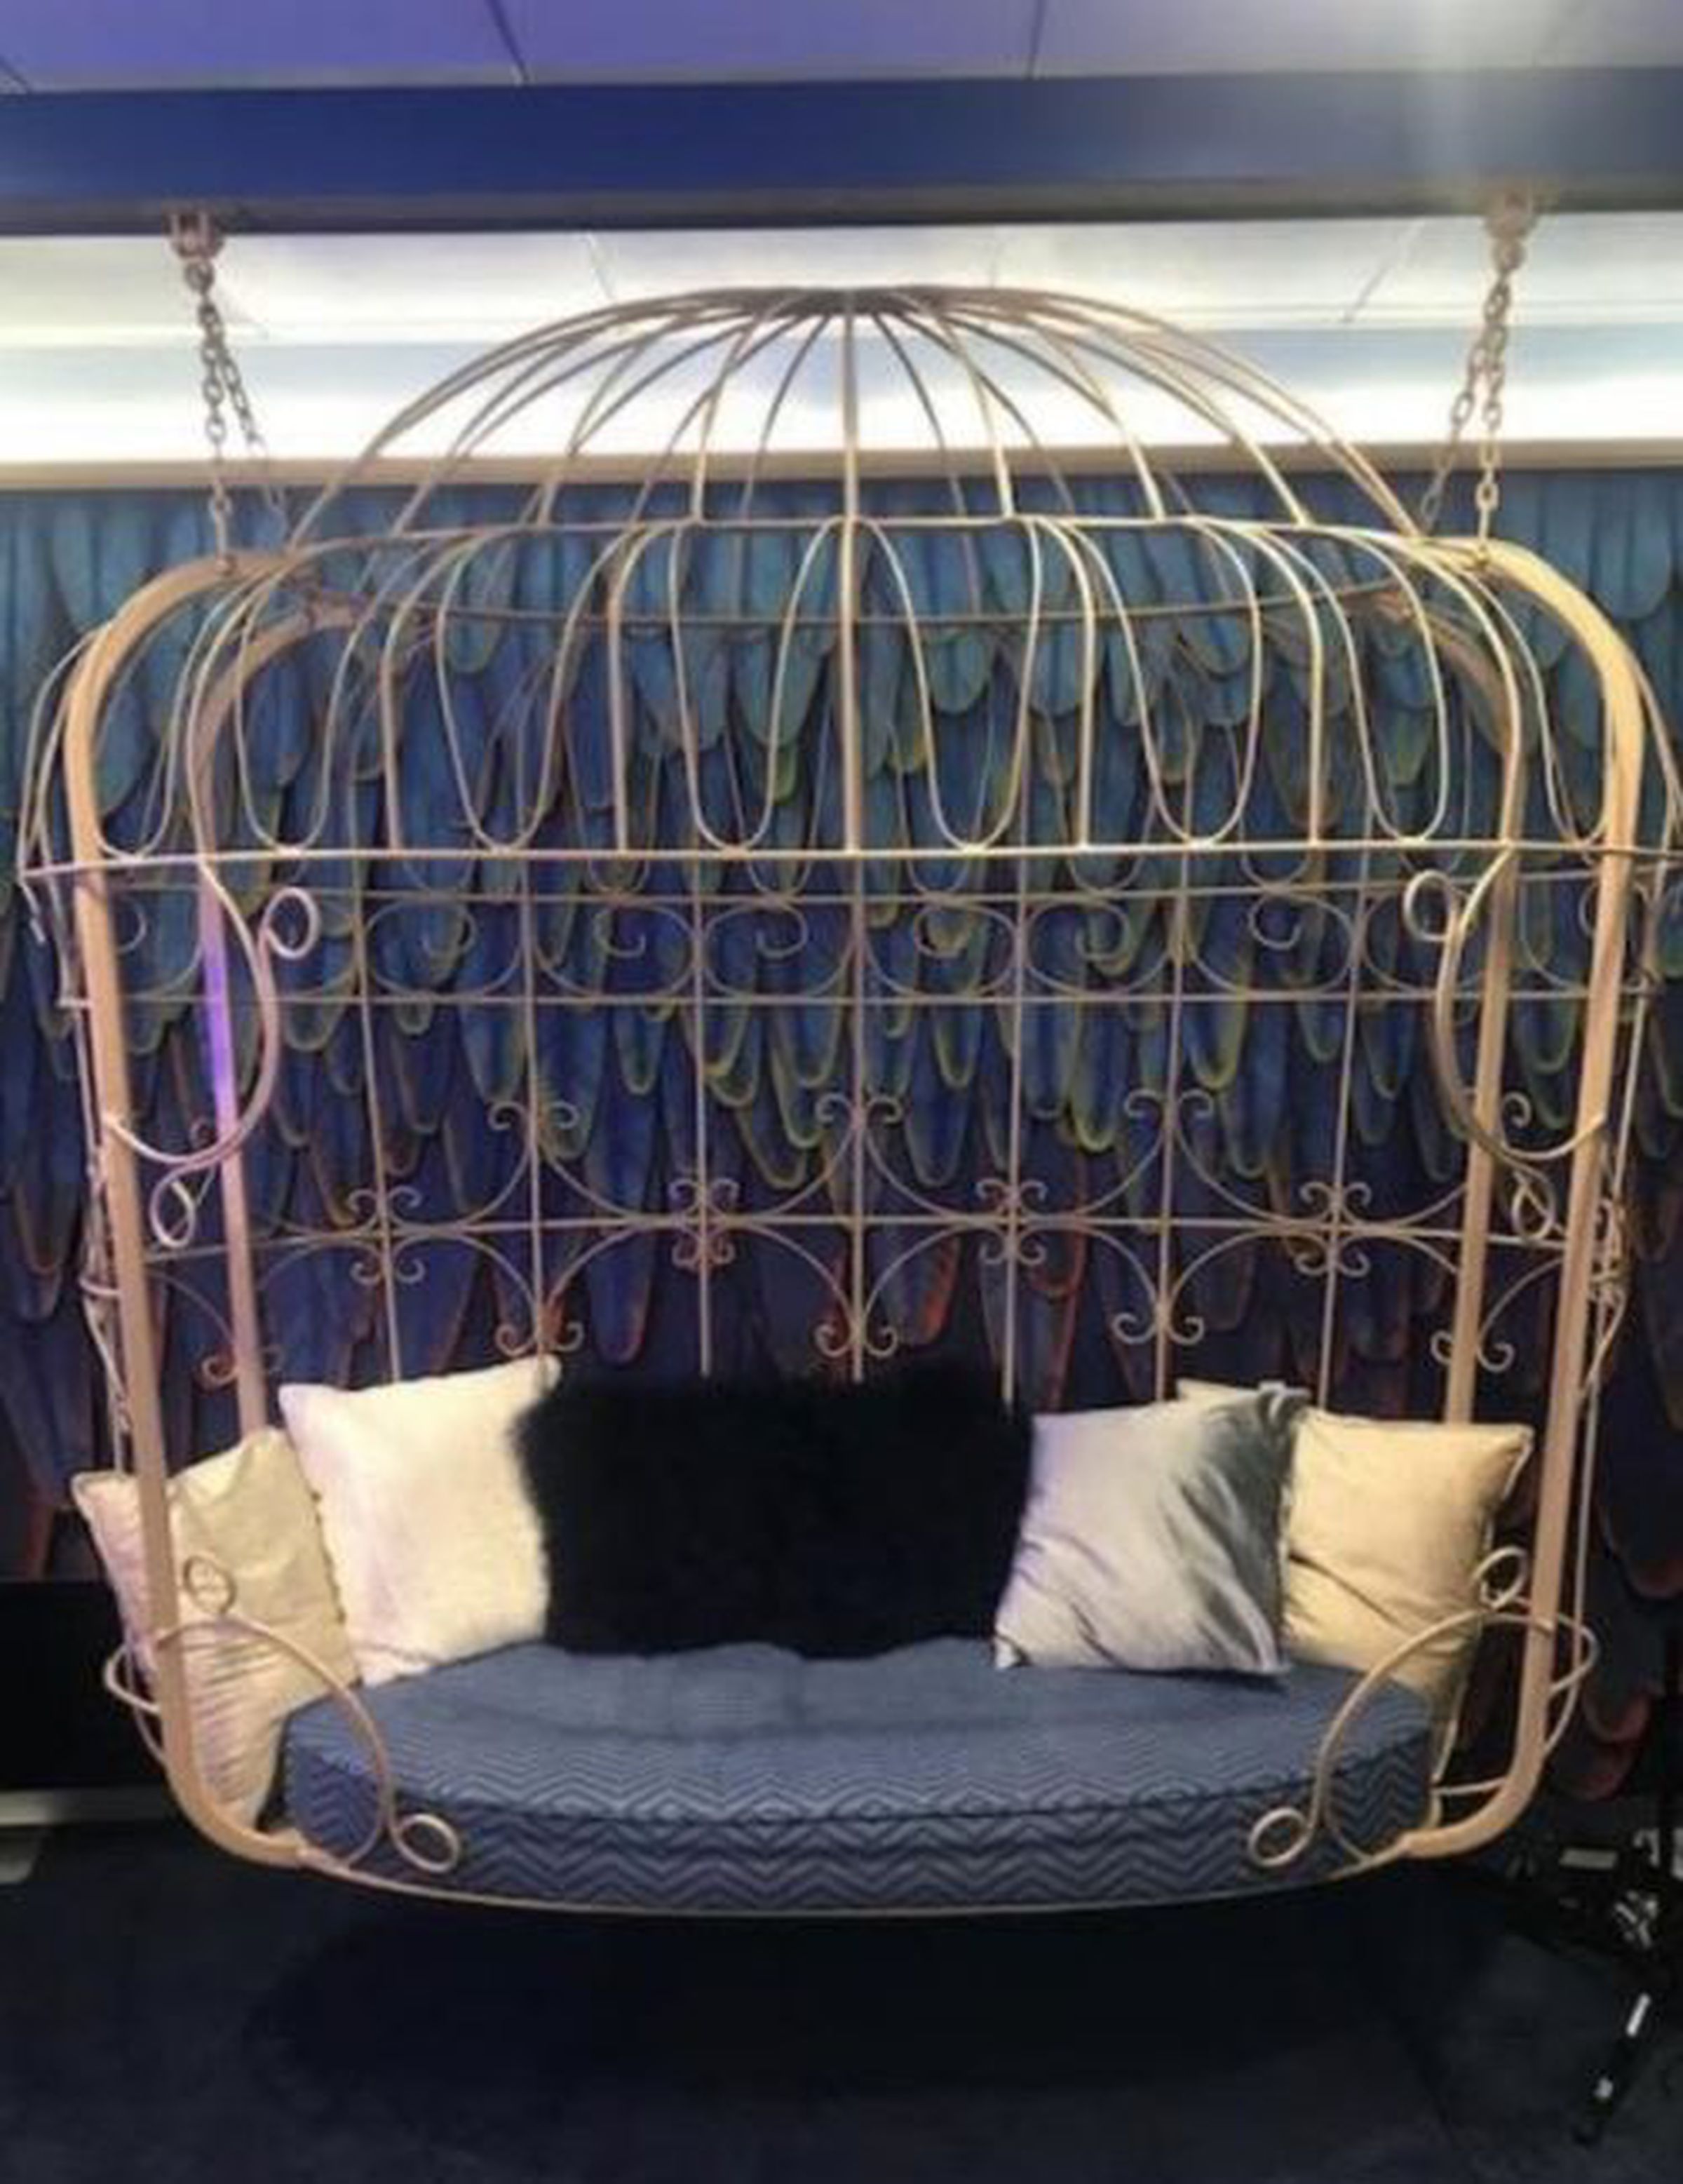 An image of a listing from X’s Twitter rebranding auction showing a birdcage-shaped sofa swing.